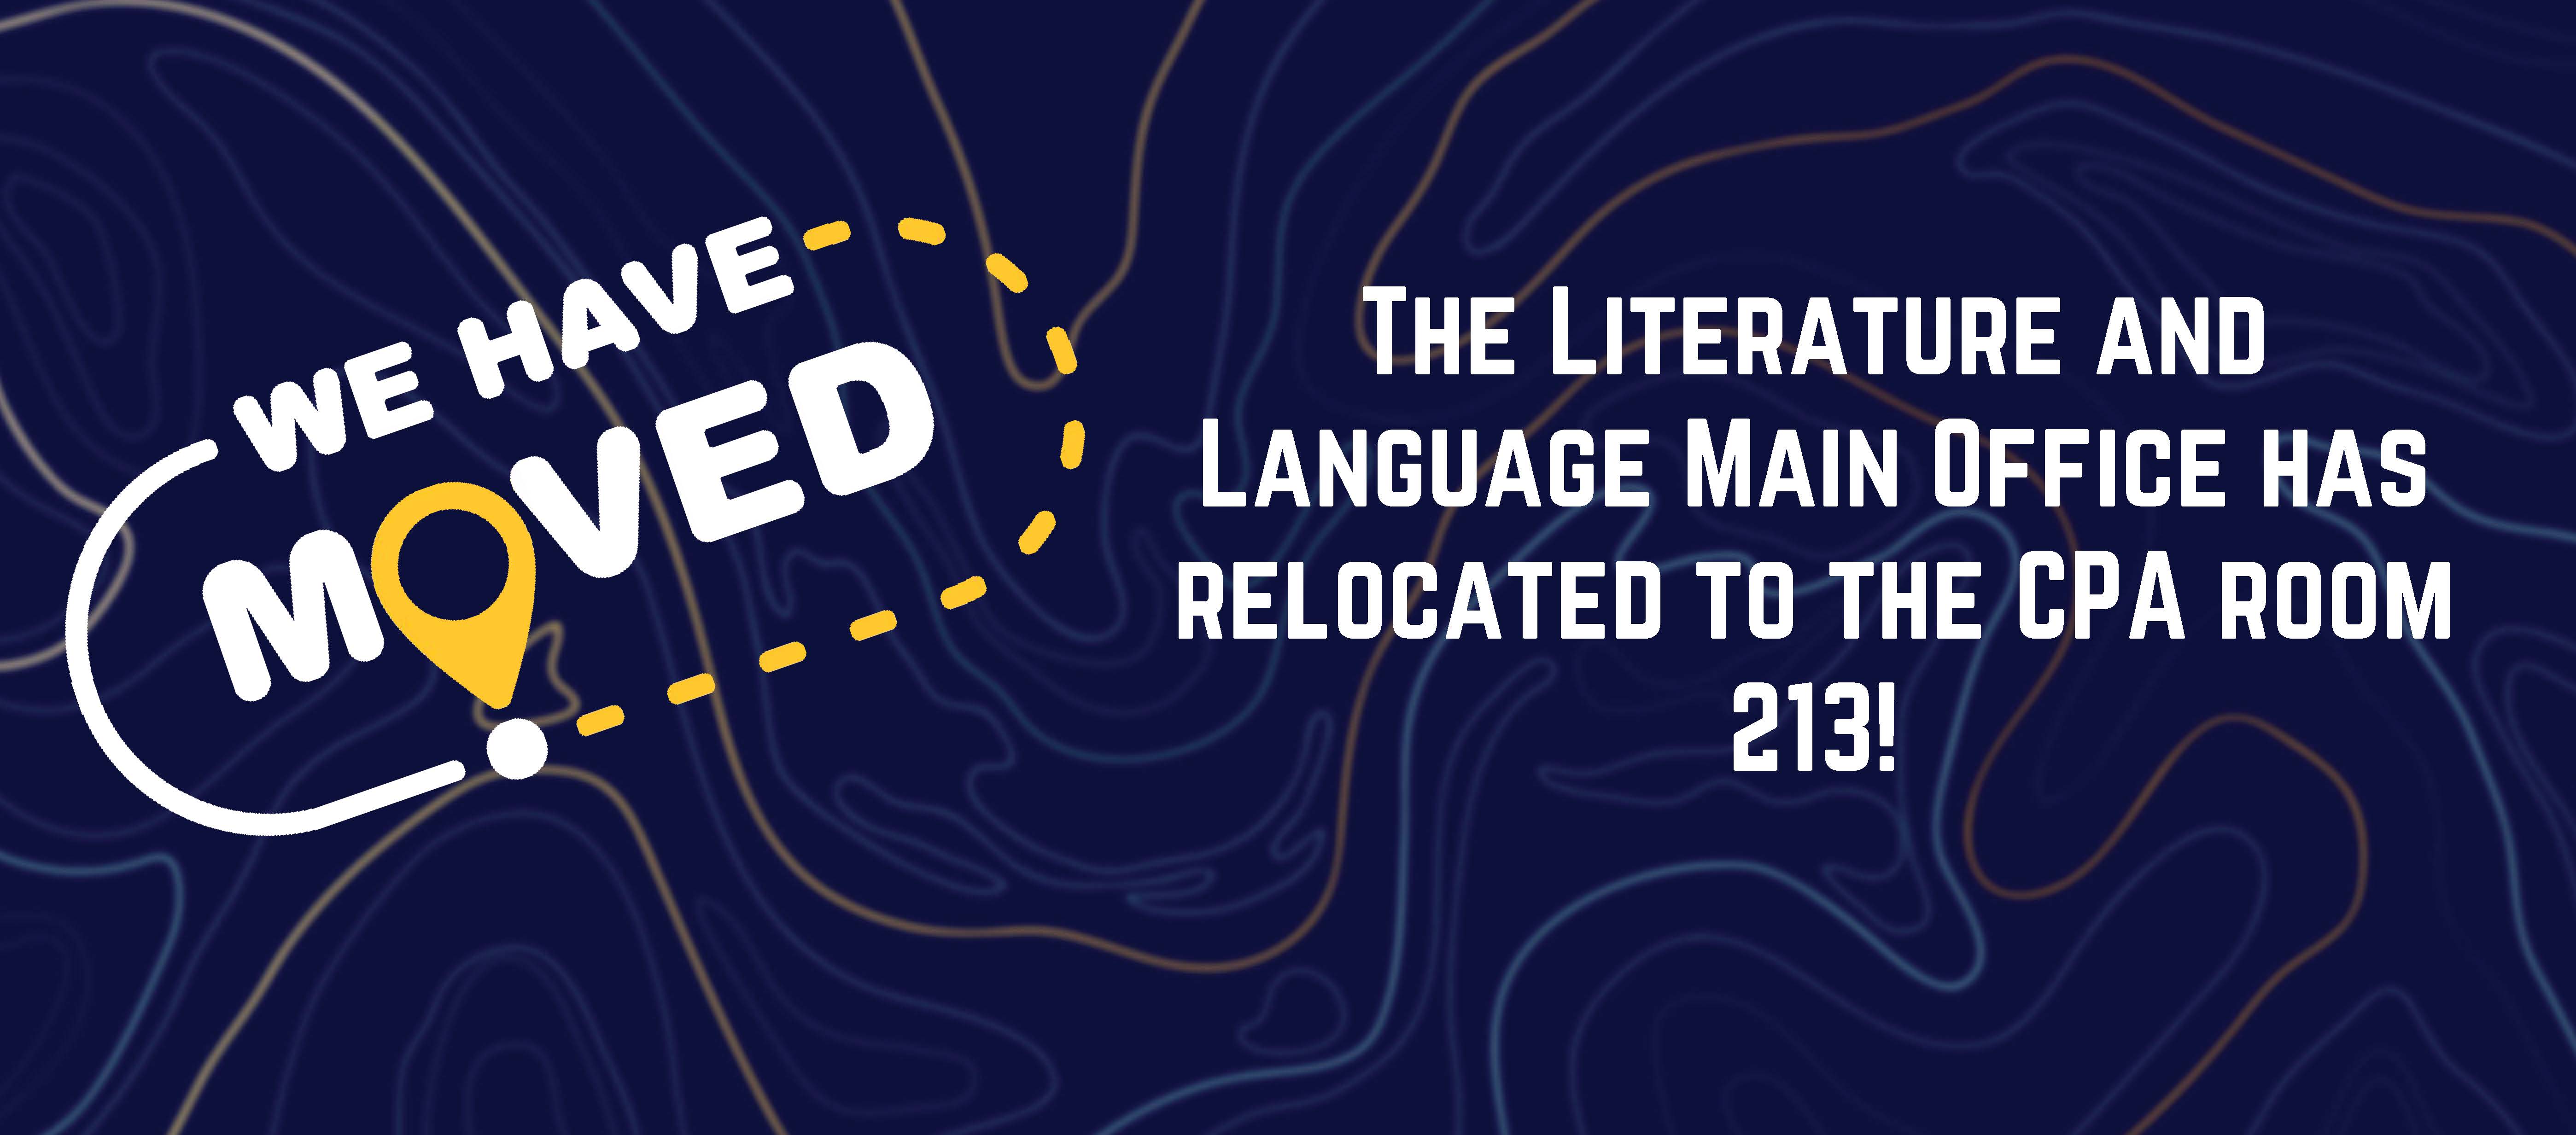 Abstract blue and gold background with text that reads, "We have moved. The Literature and Language Main Offics has relocated to the CPA room 213!"